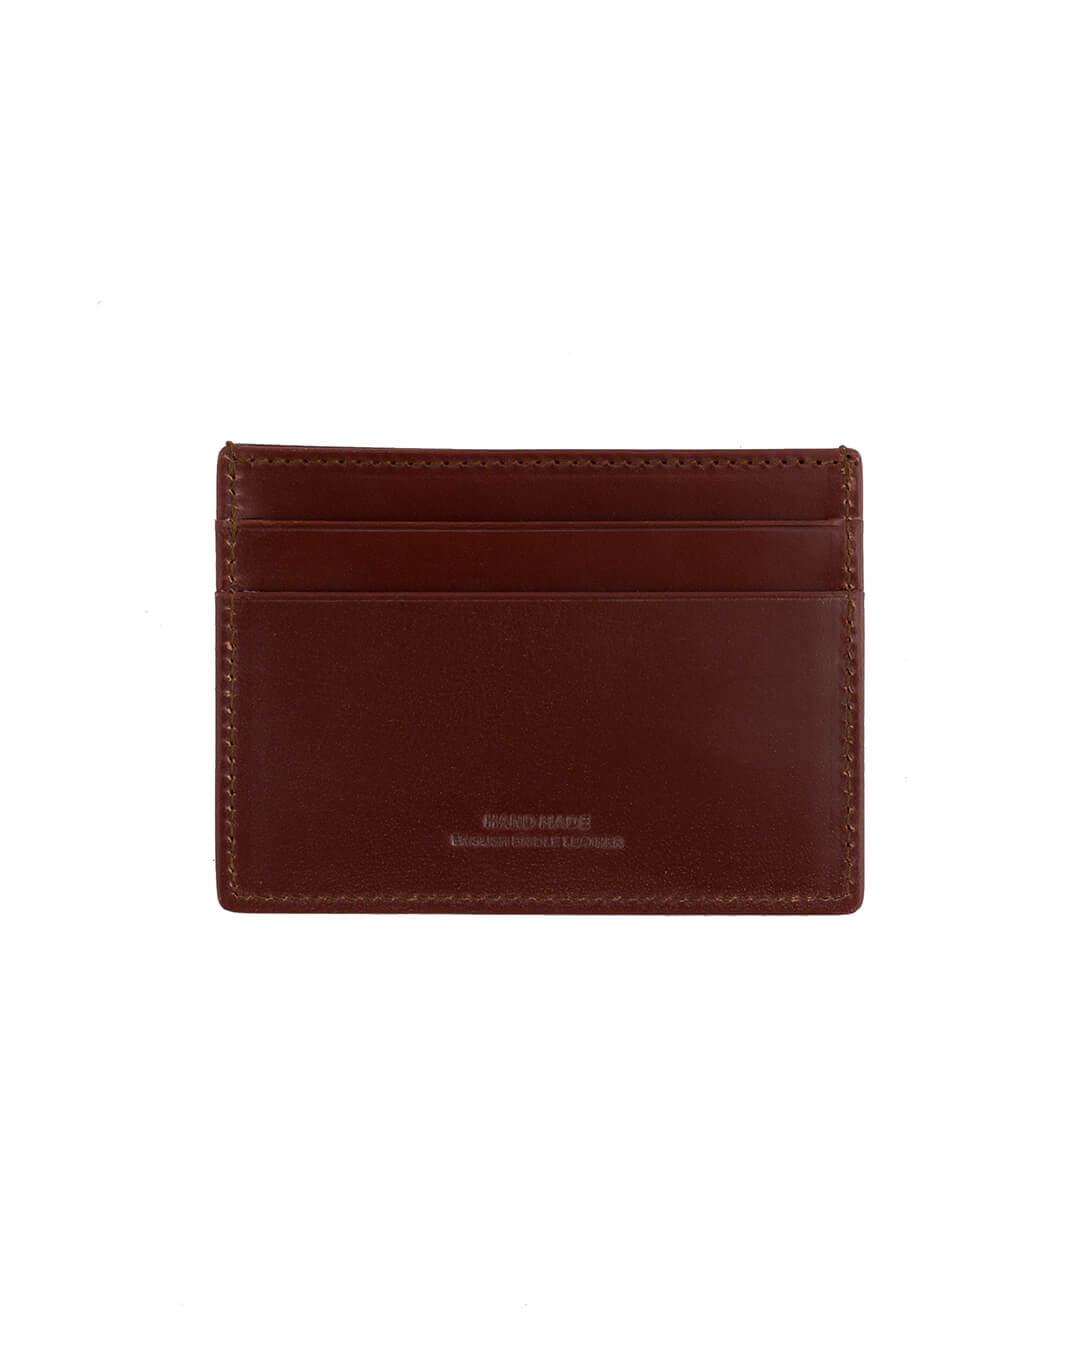 Cavesson's Wallets Cavesson's Brown Card Case